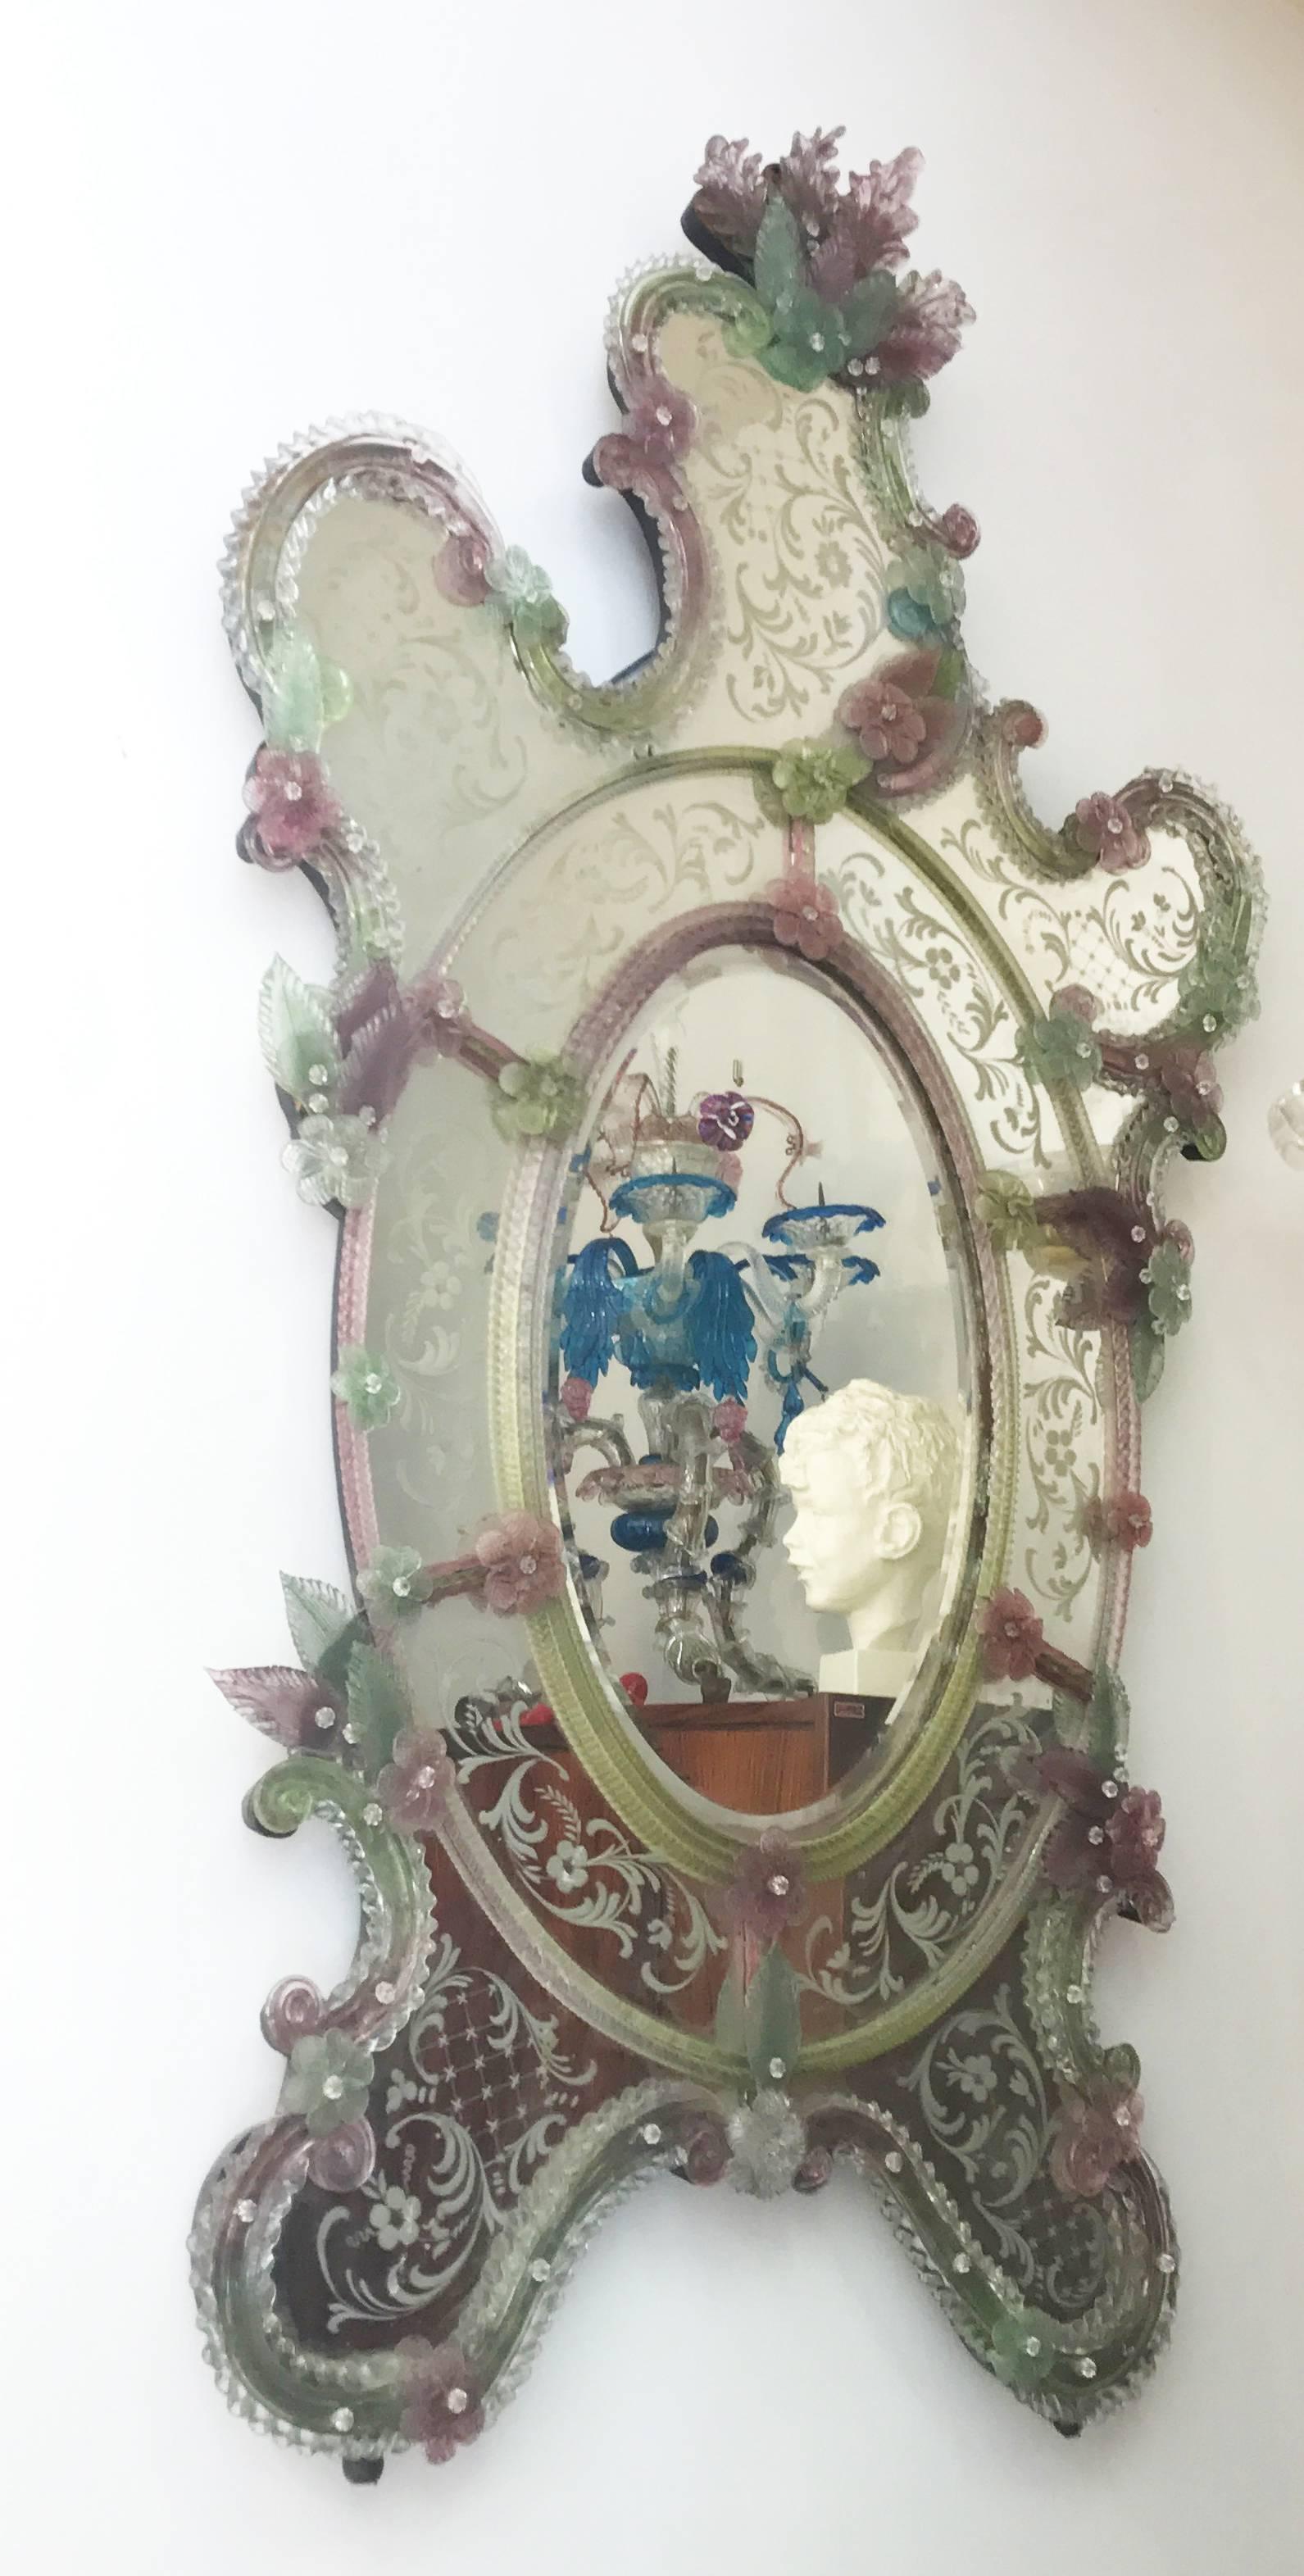 This beautiful Venetian mirror features etched floral motifs adorning the mirrored frame. Along the edges of the frame are glass rope accents and numerous glass pink and green flowers.
Very good vintage condition.
  